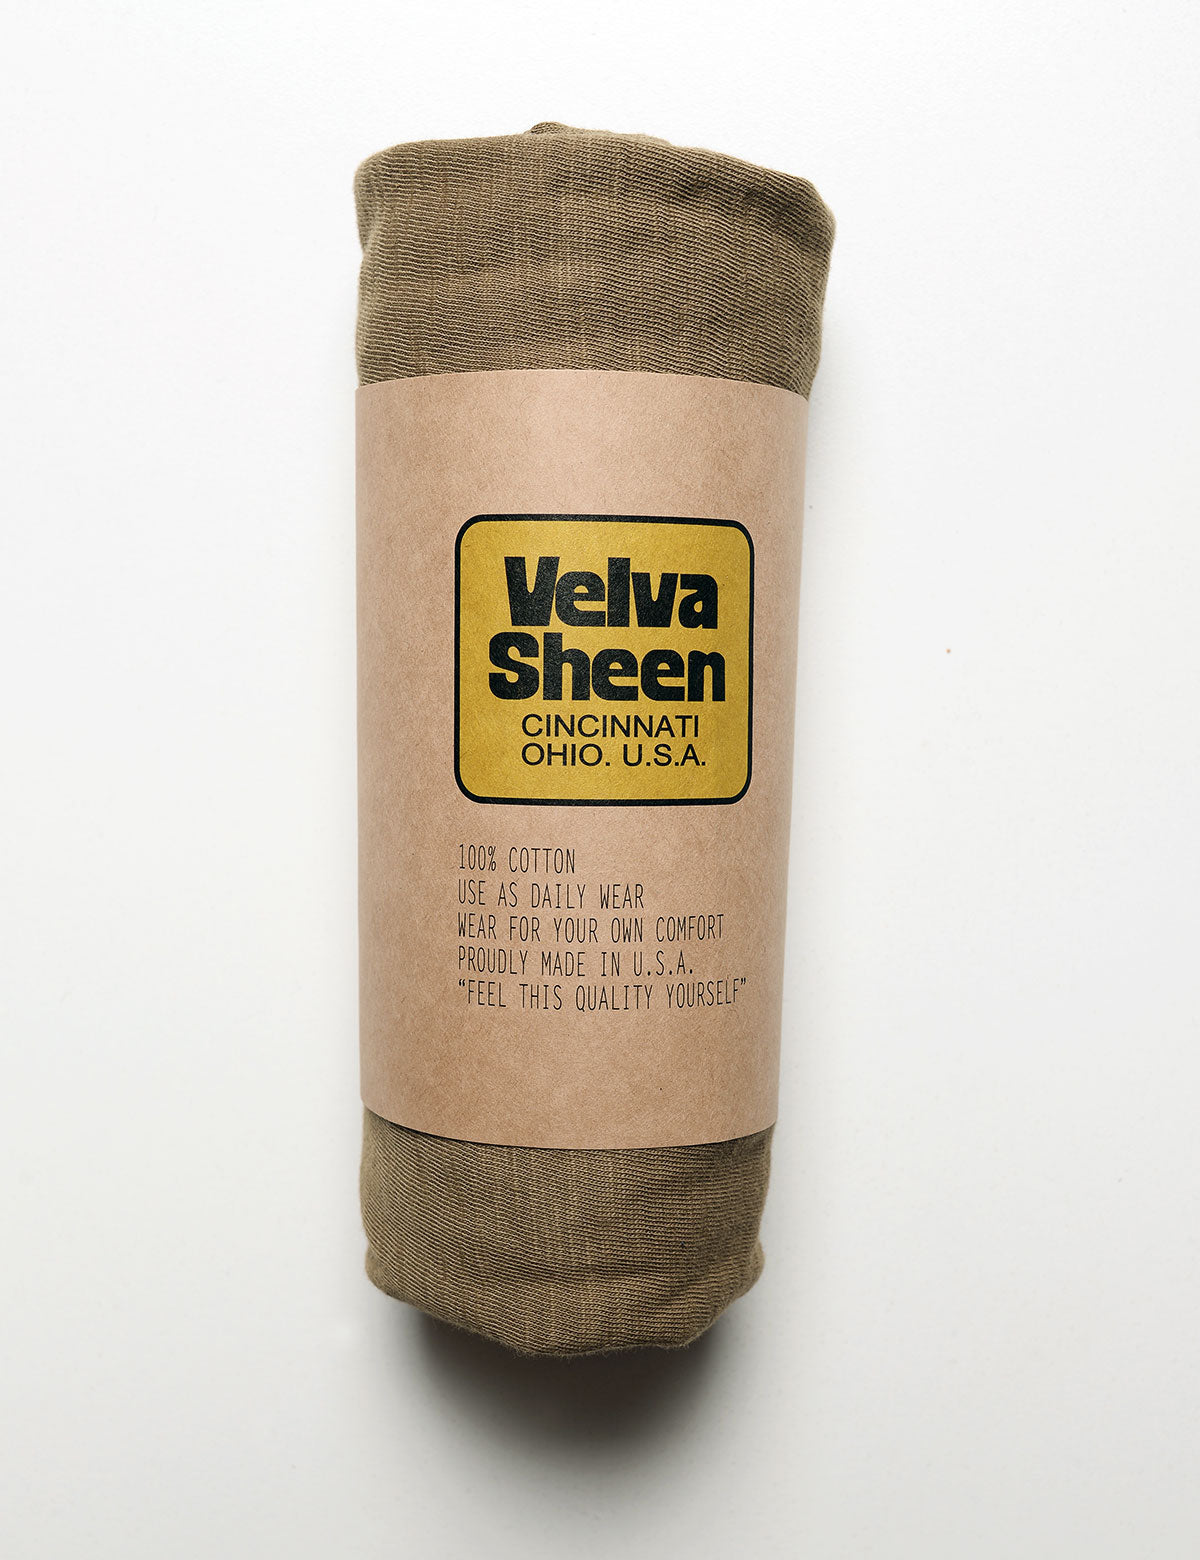 Velva Sheen Long Sleeve Crewneck T-Shirt in Olive rolled in paper sleeve